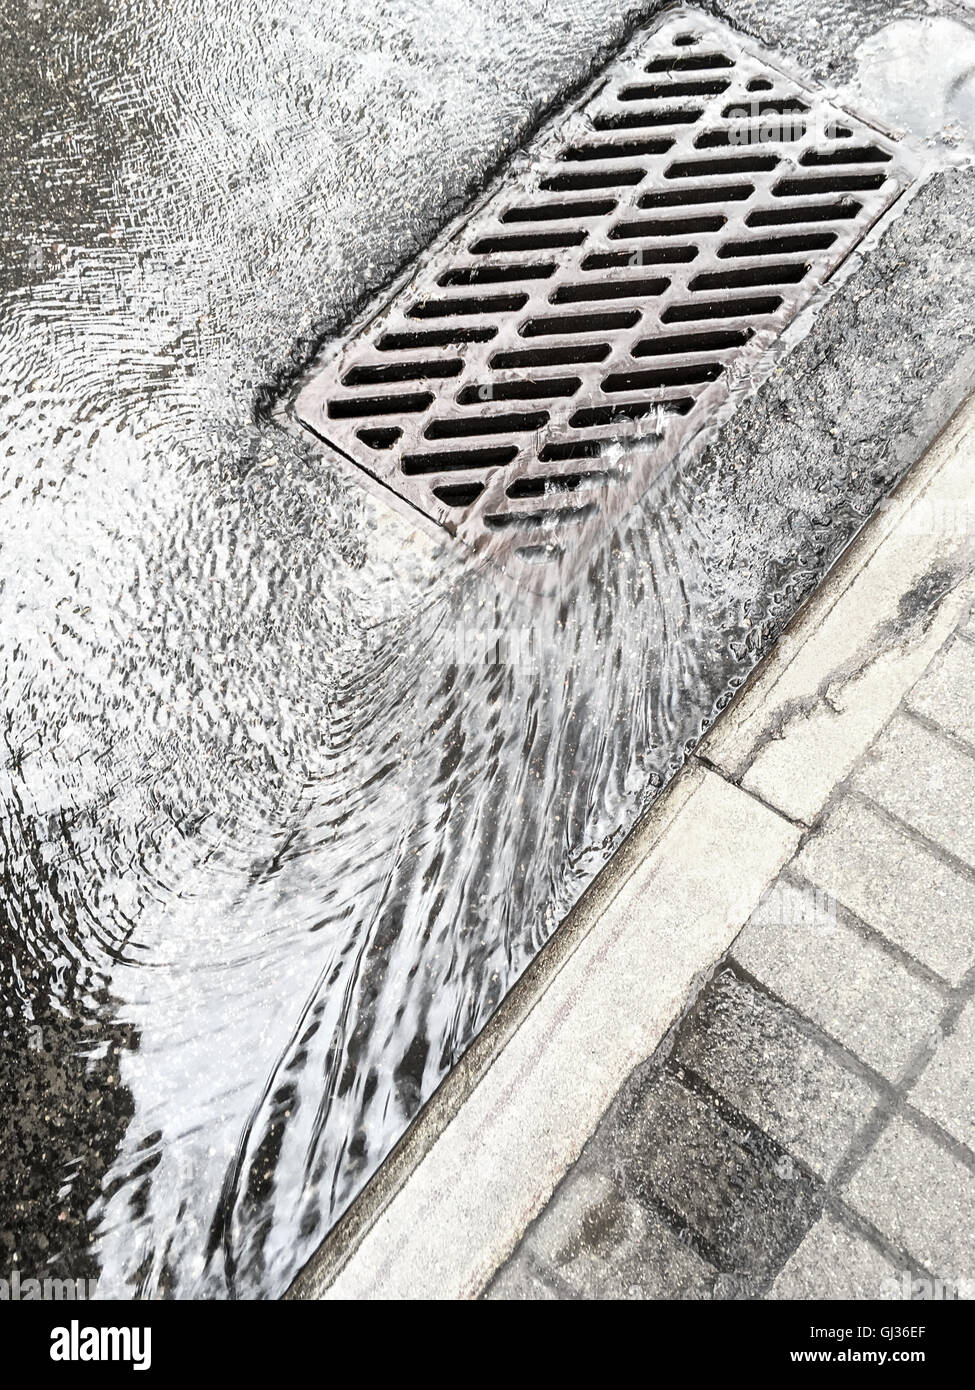 rain water flows down through sewer grate on street Stock Photo